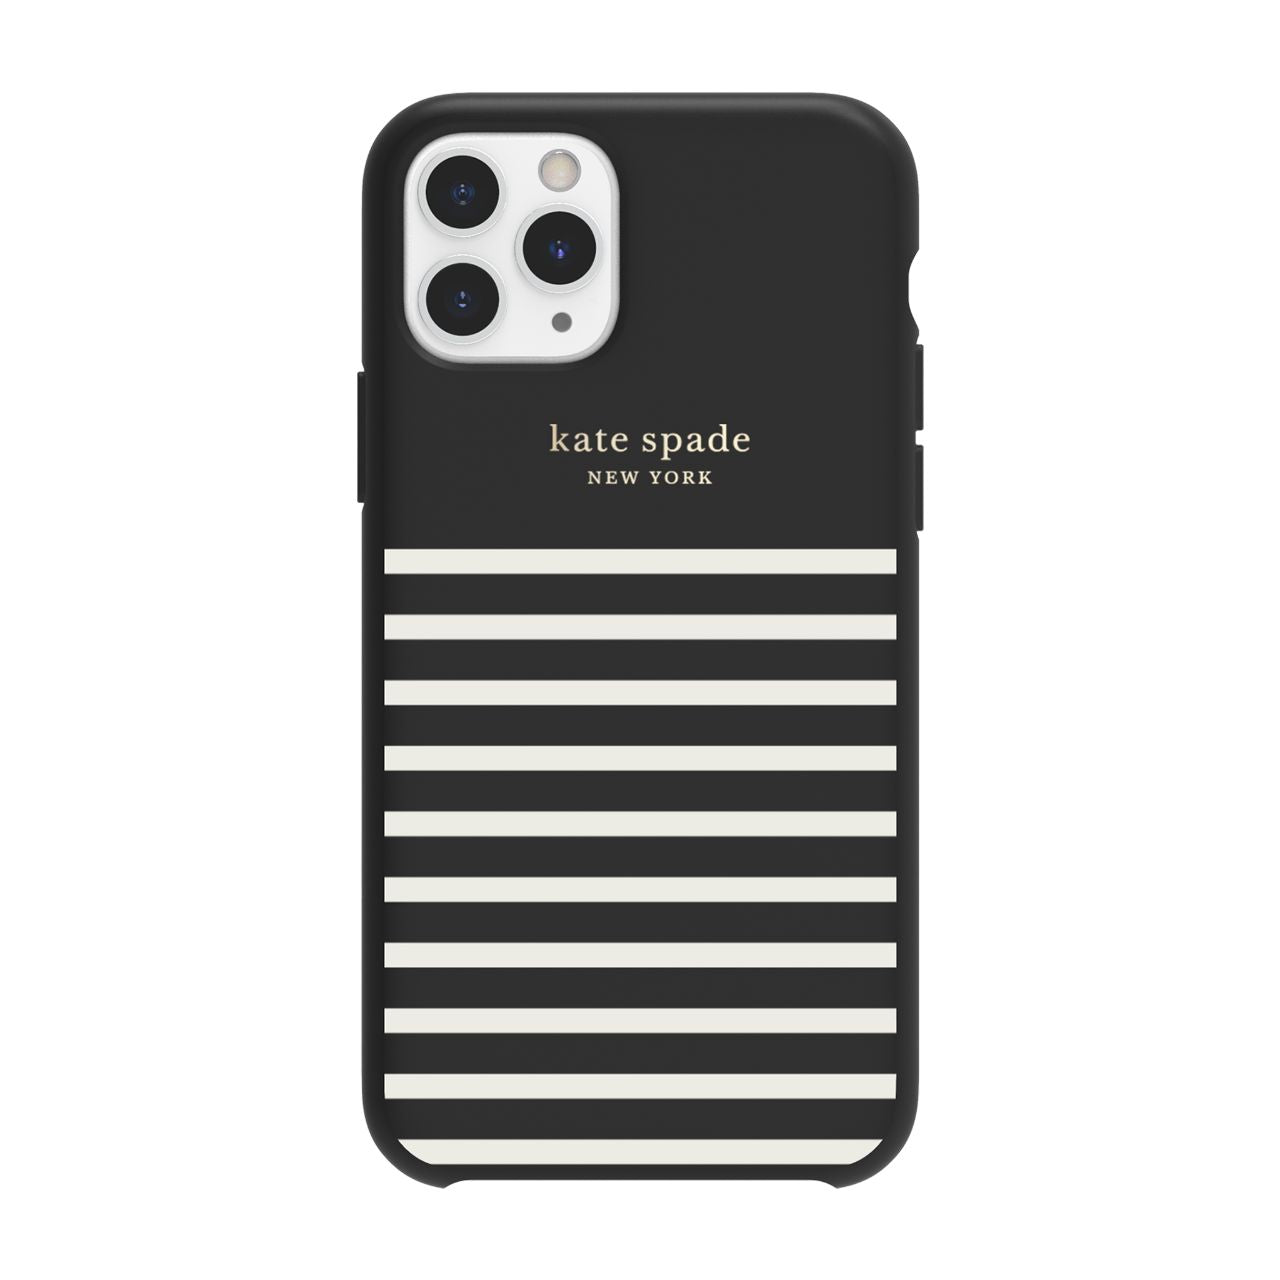 Total 38+ imagen black and white kate spade phone case